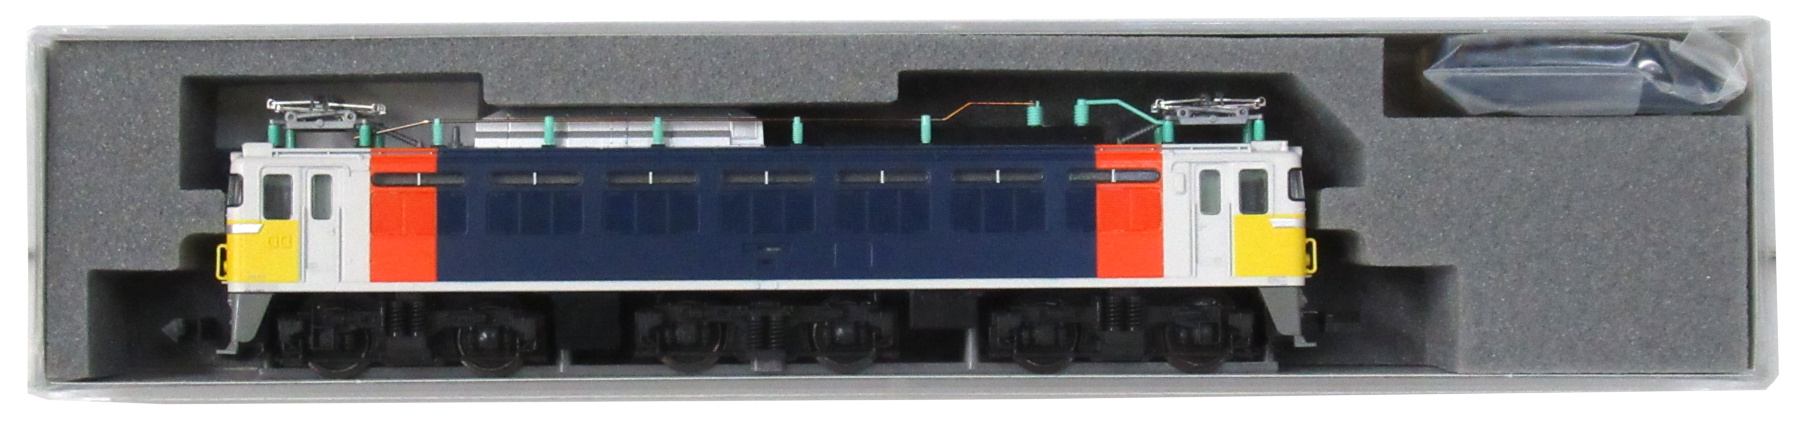 3066-A EF81 カシオペア色